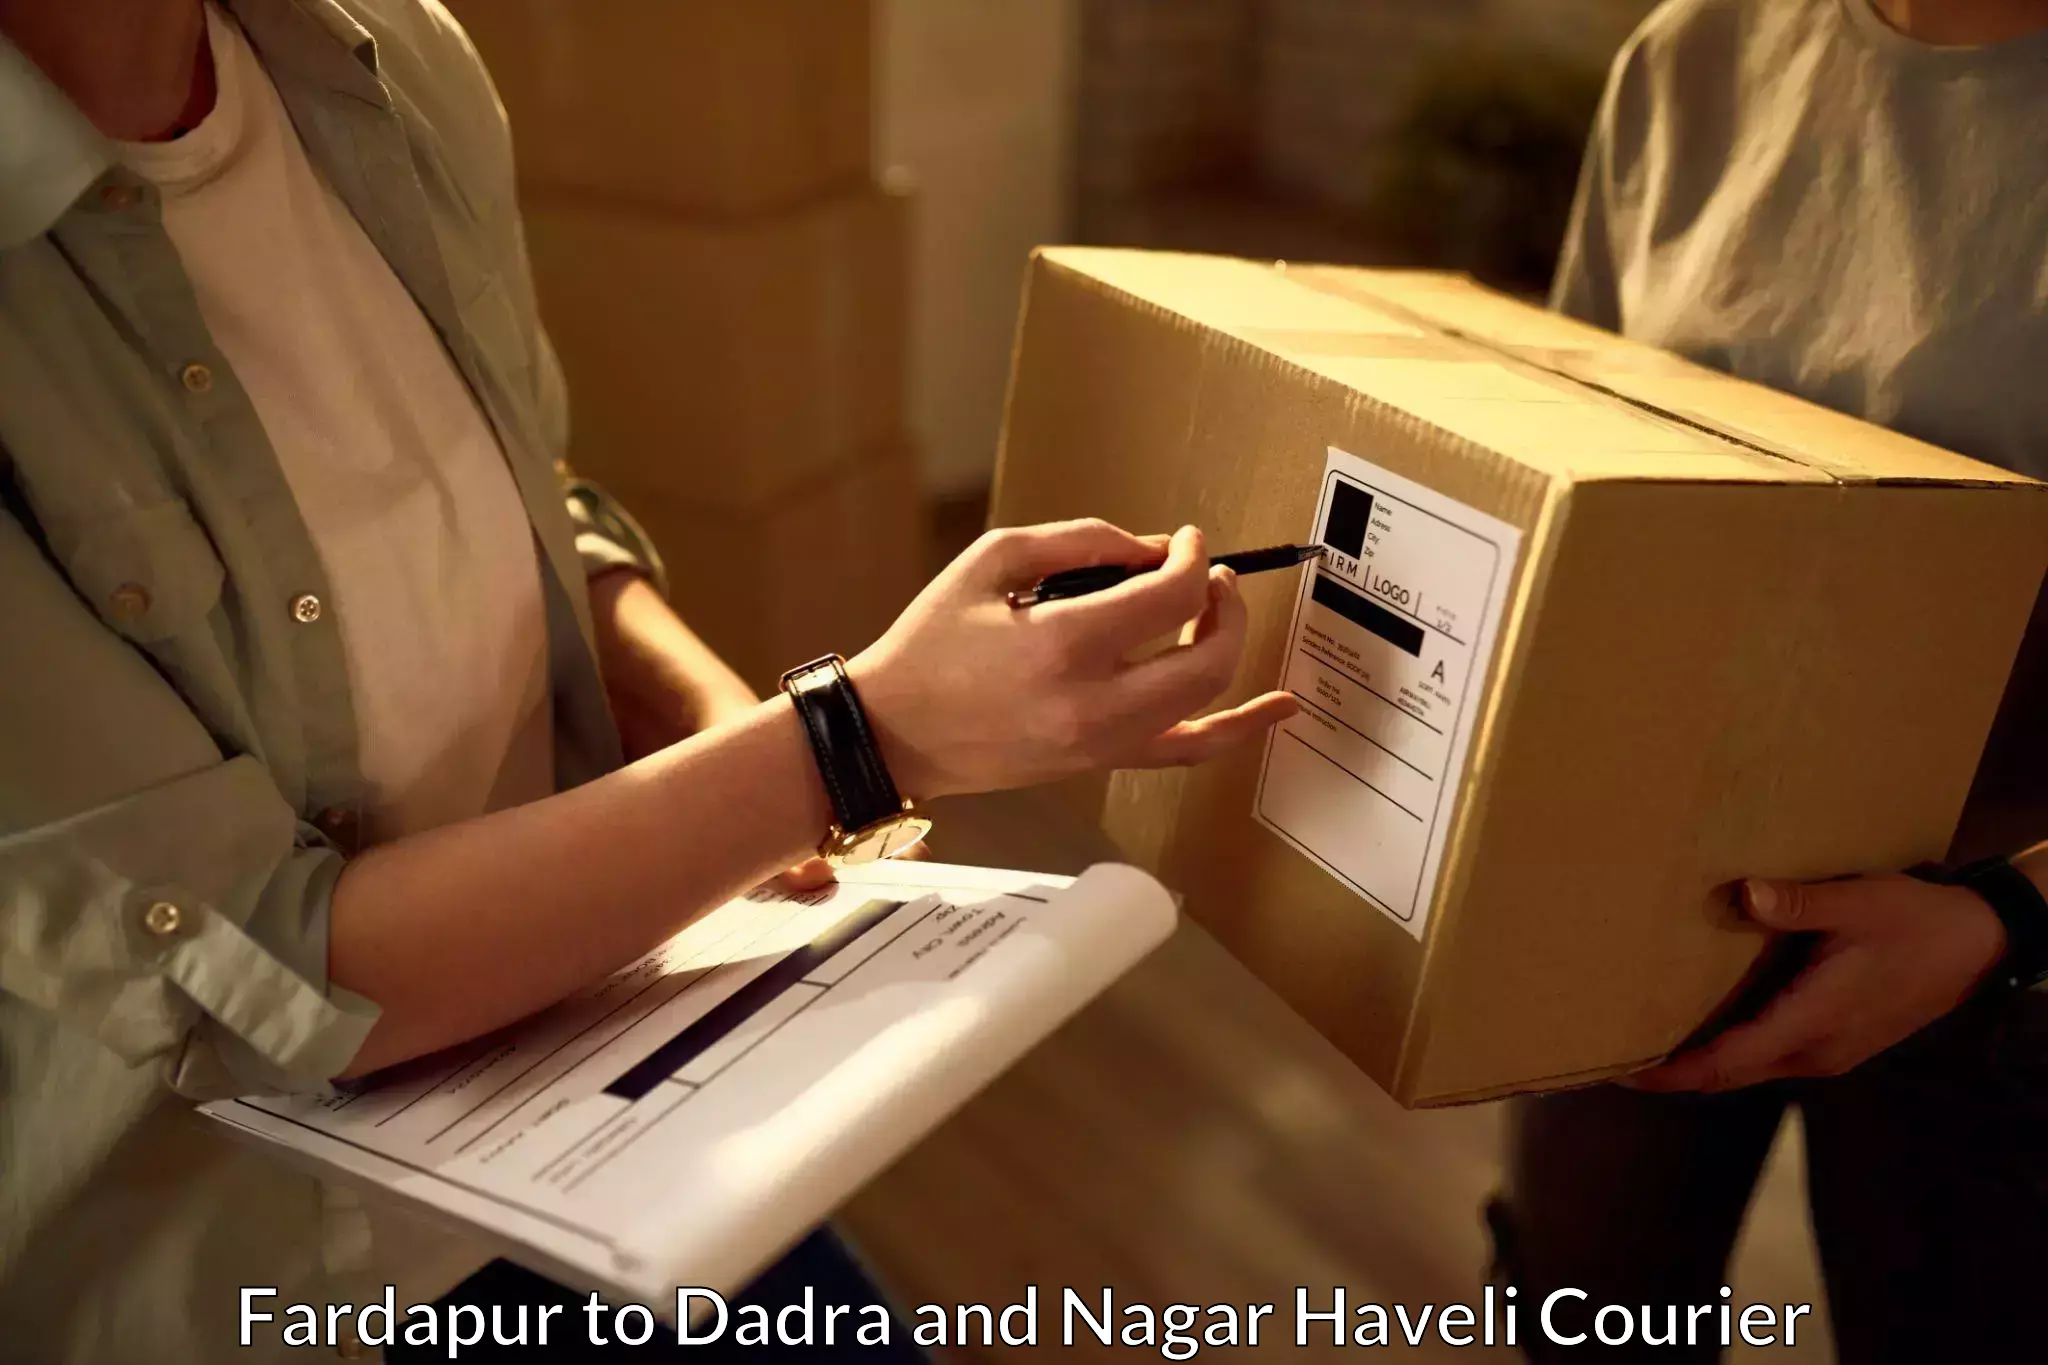 Nationwide courier service Fardapur to Dadra and Nagar Haveli